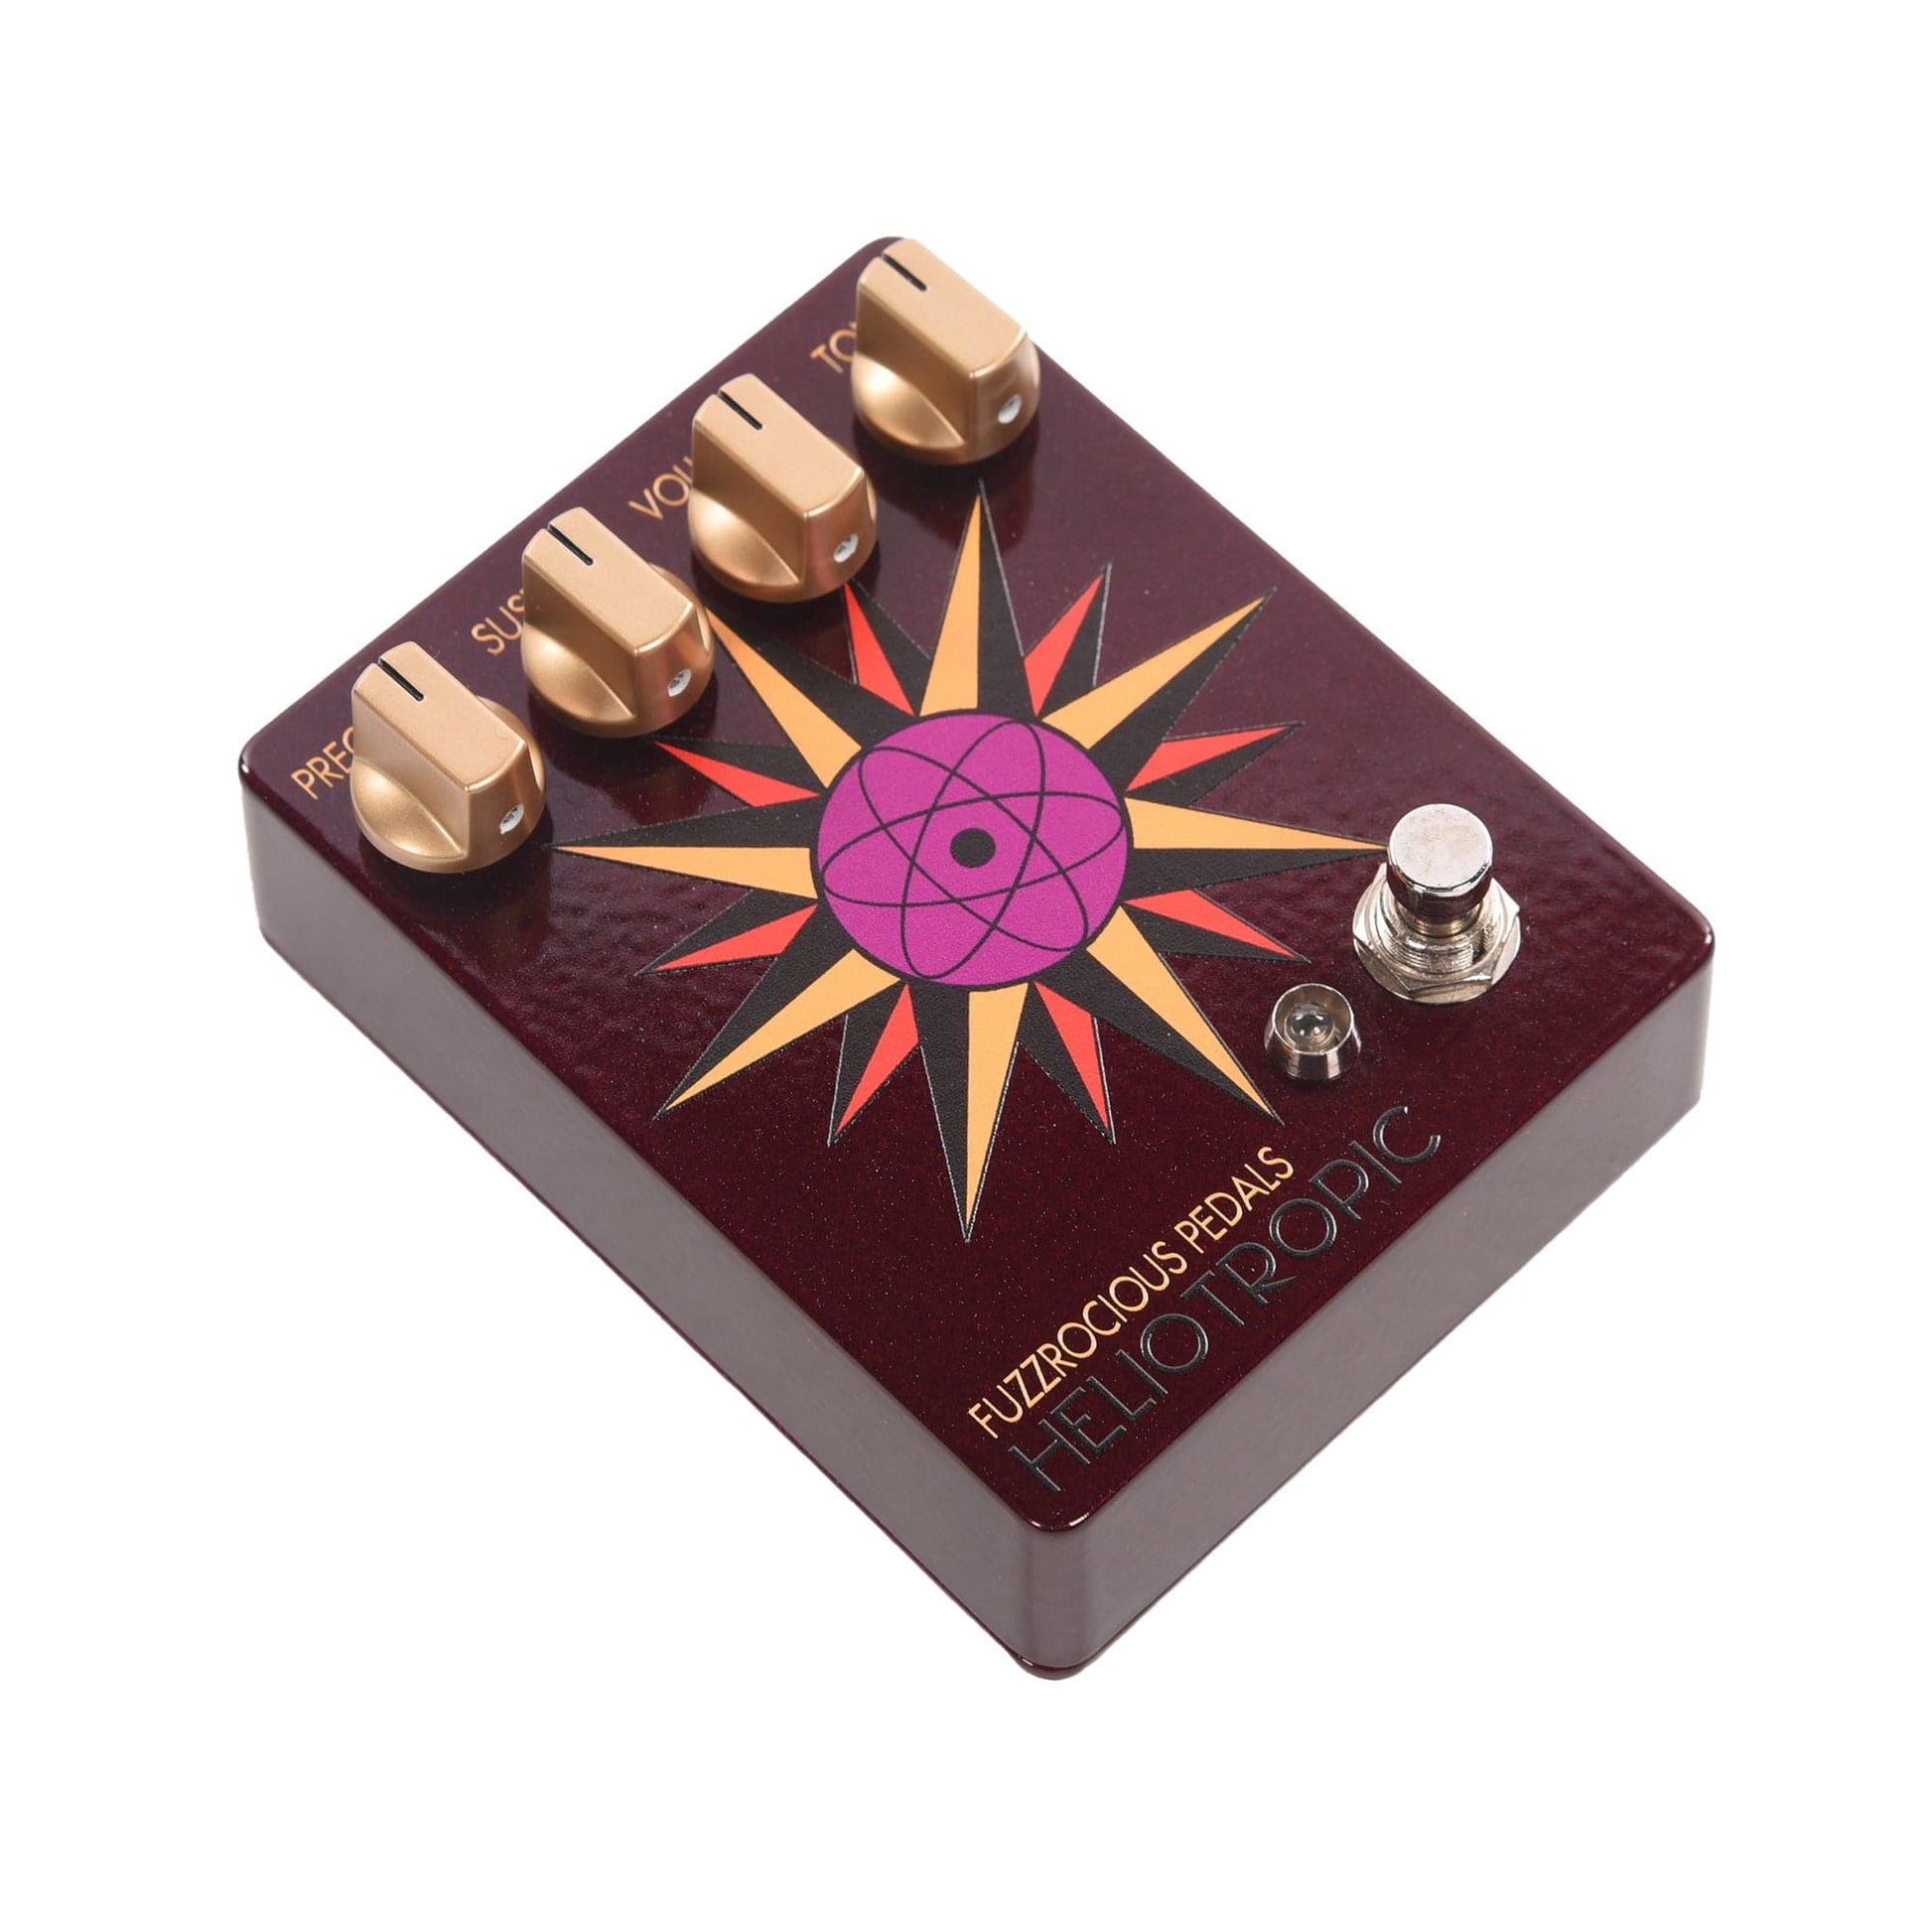 Fuzzrocious Heliotropic Fuzz Pedal Deep Red Effects and Pedals / Fuzz